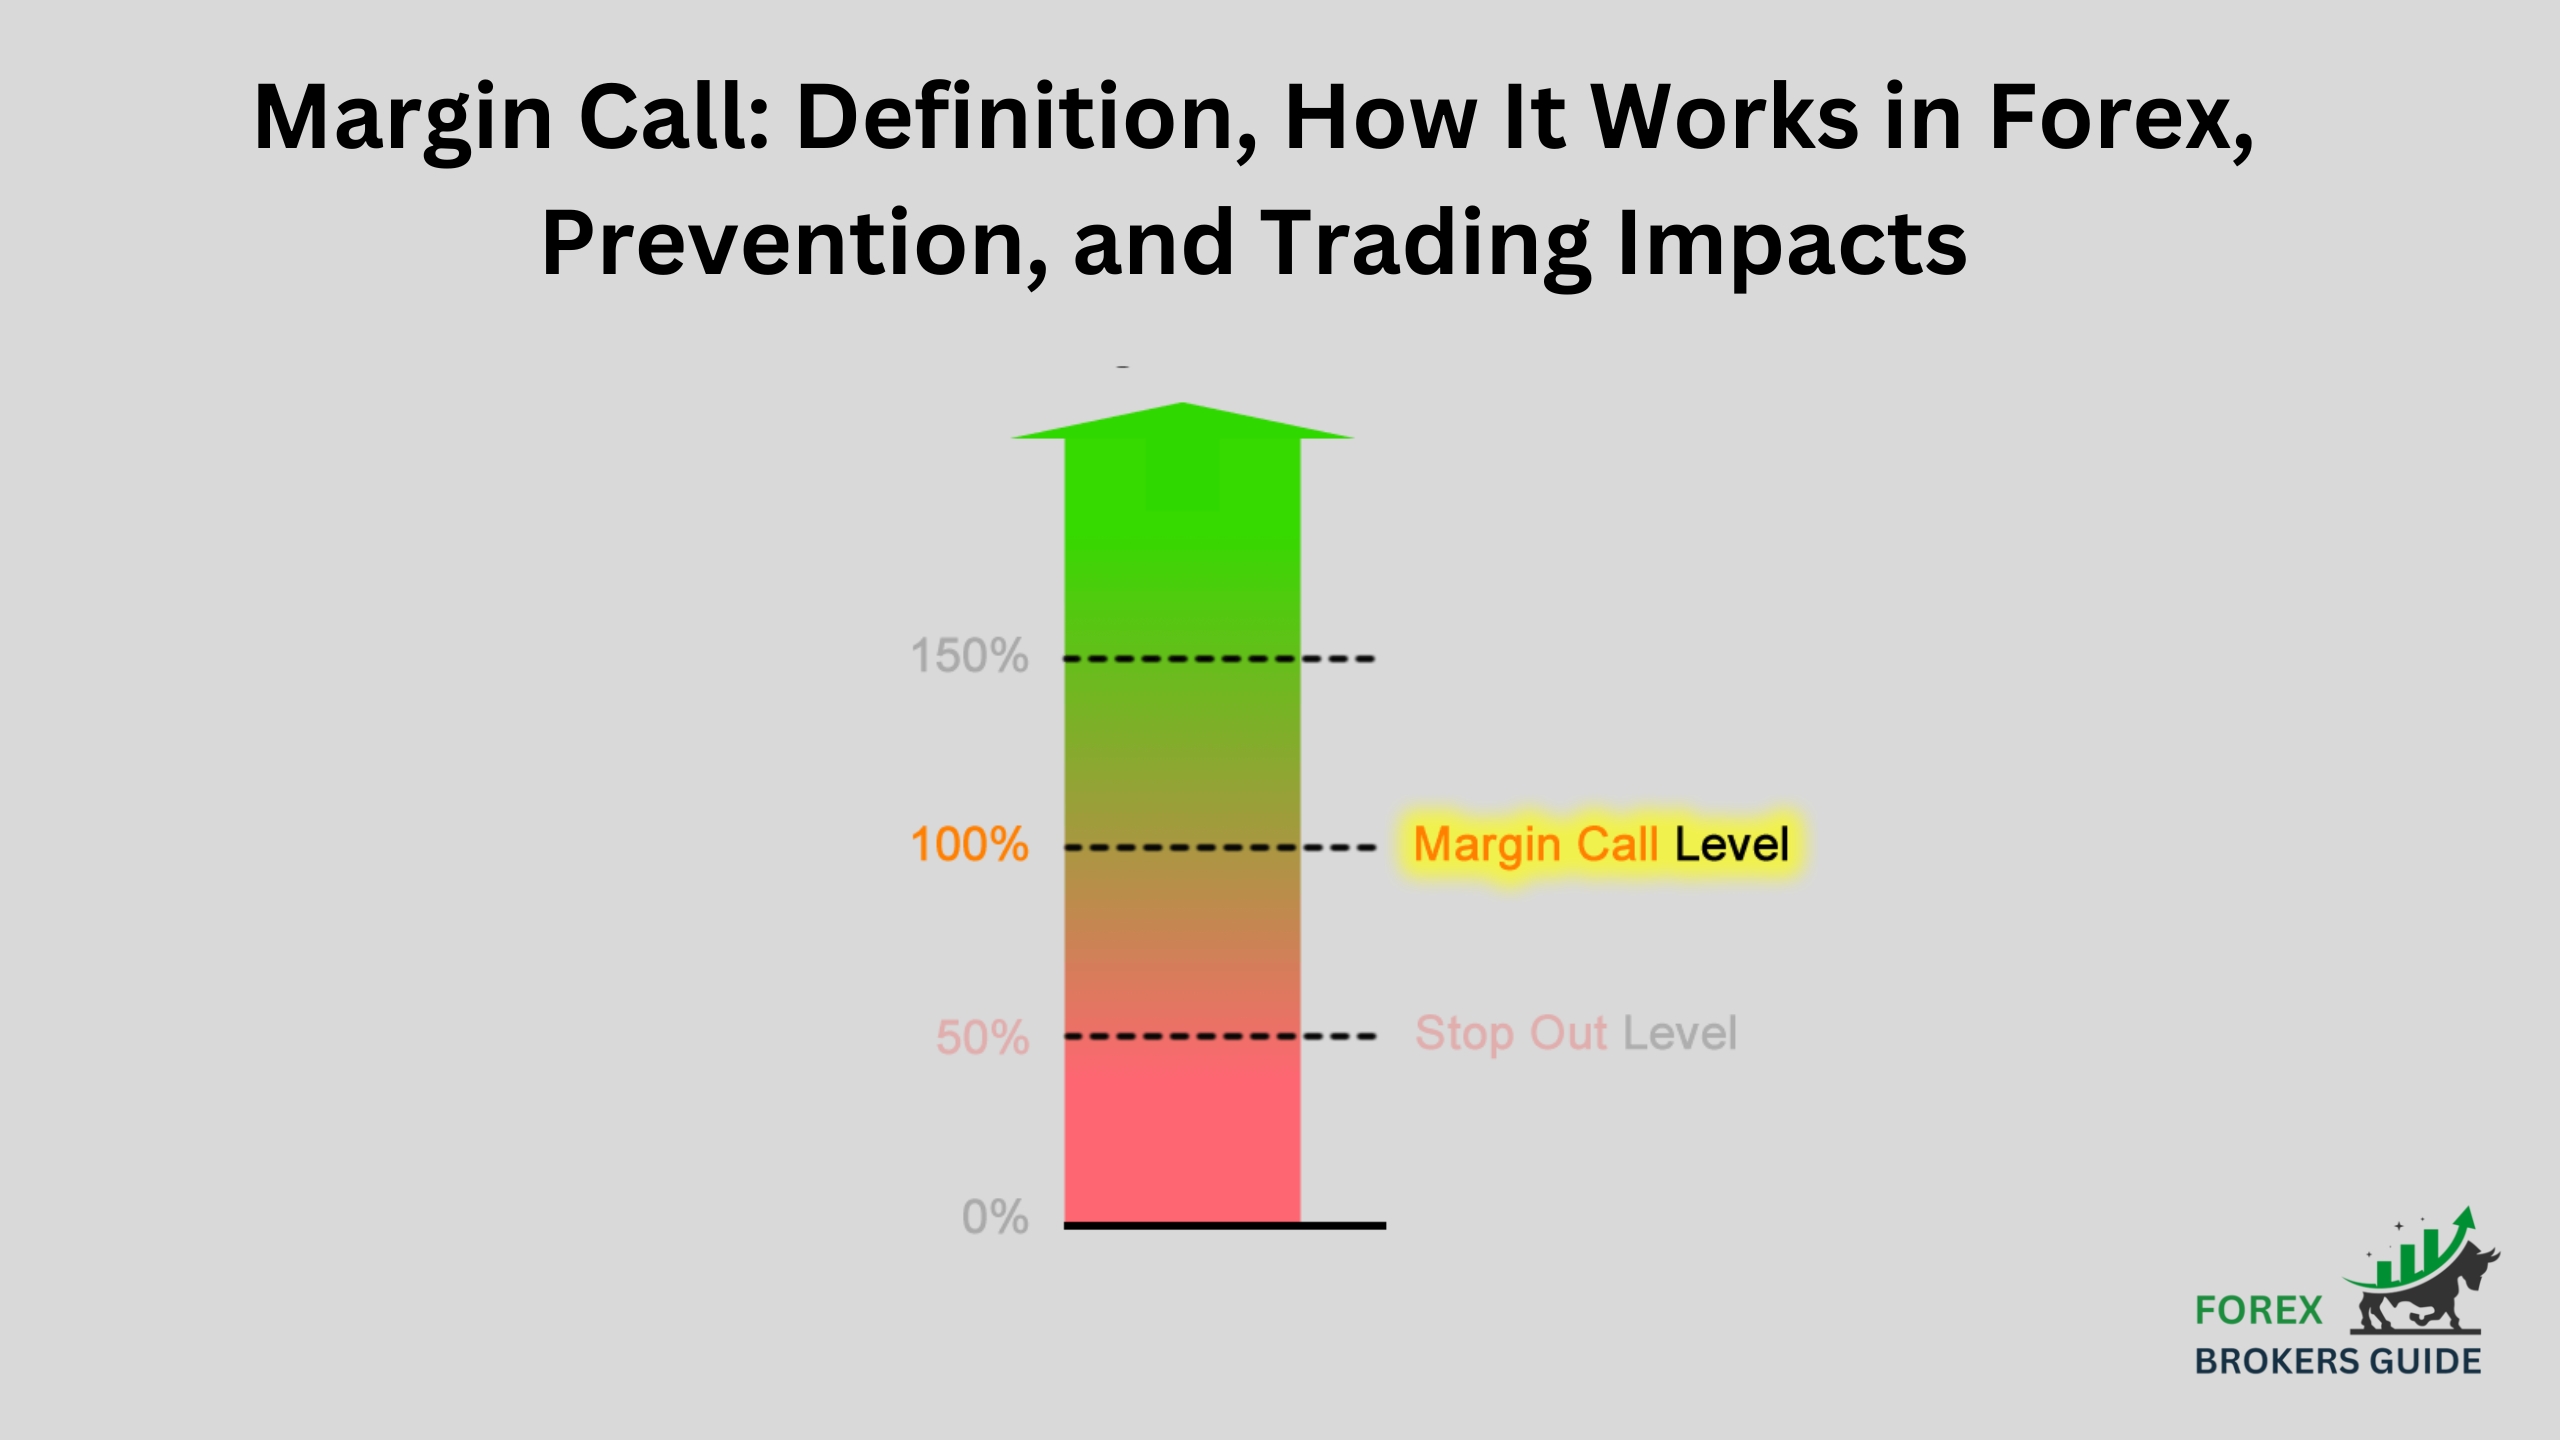 Margin Call Definition, How It Works in Forex, Prevention, and Trading Impacts